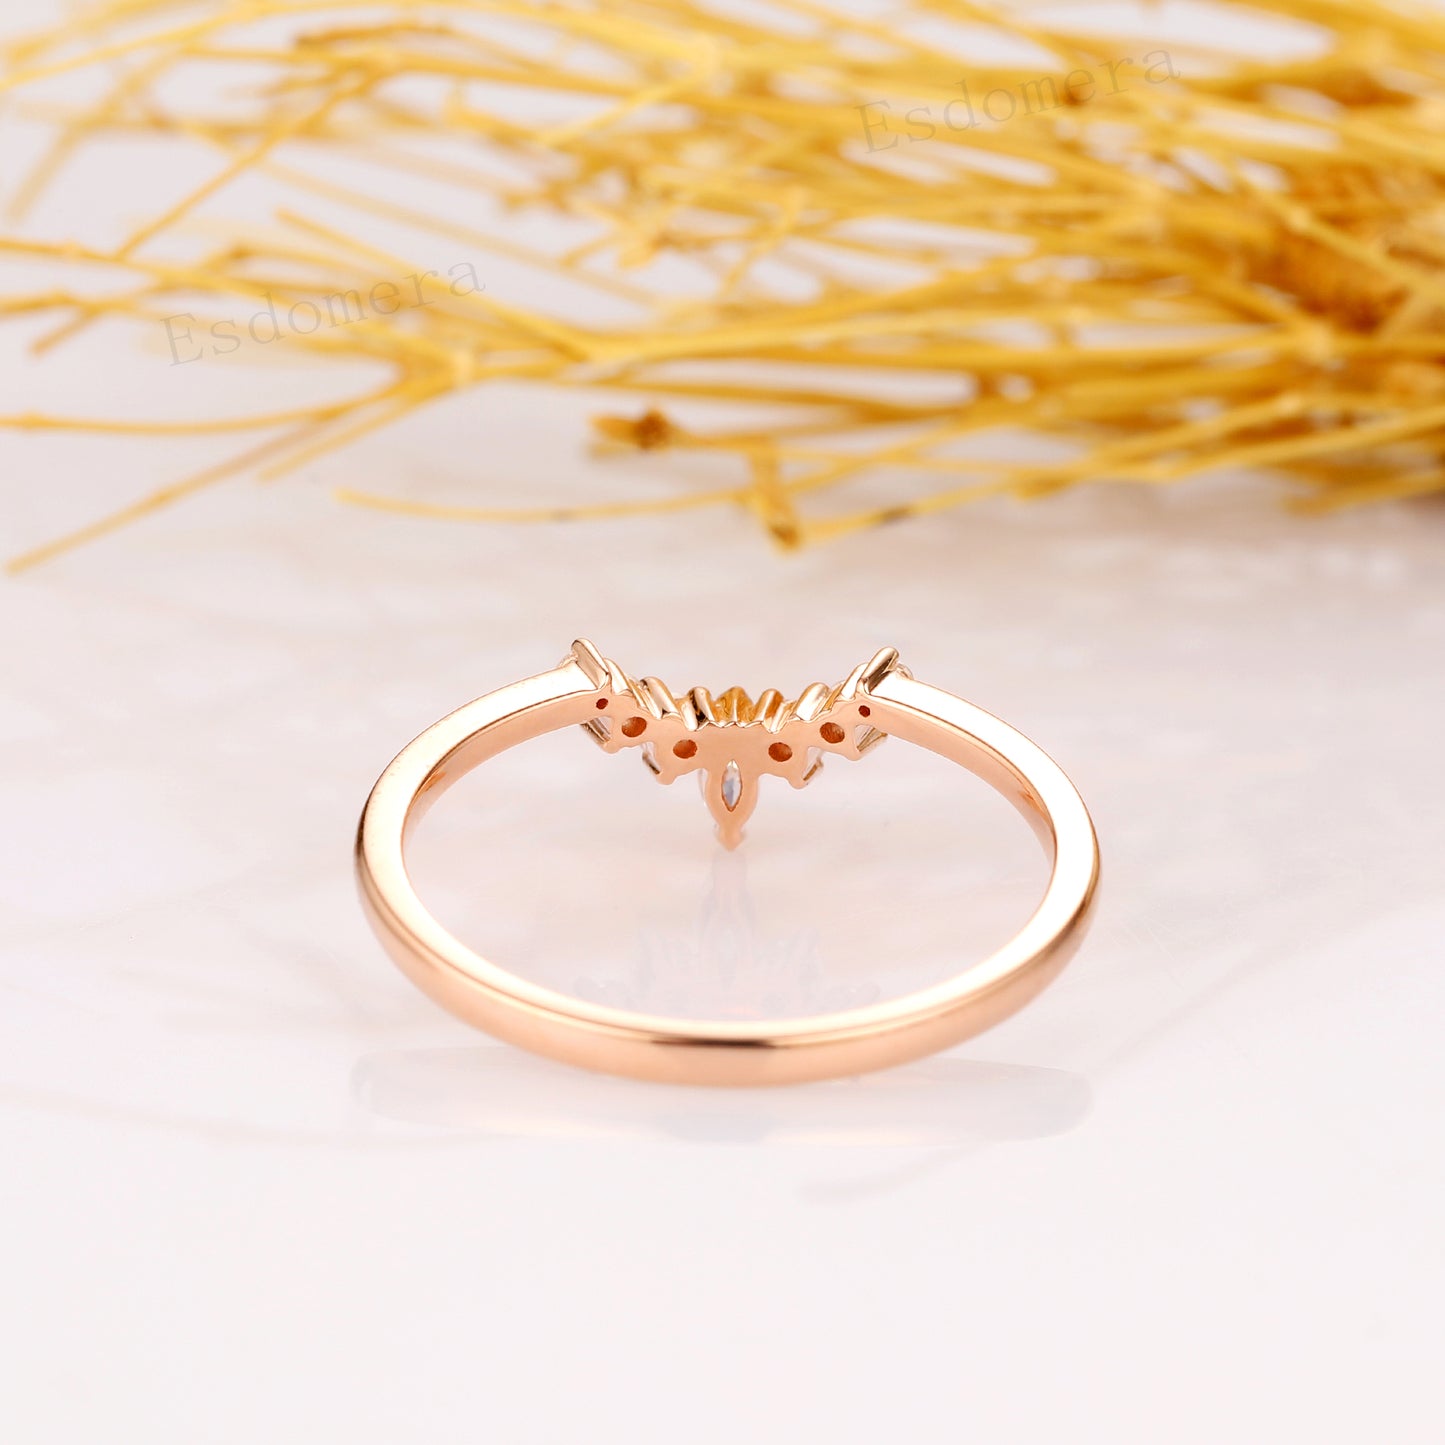 Delicate Moissanite Wedding Band, Special Design Matching Ring, Solid 14K Rose Gold Wedding Ring